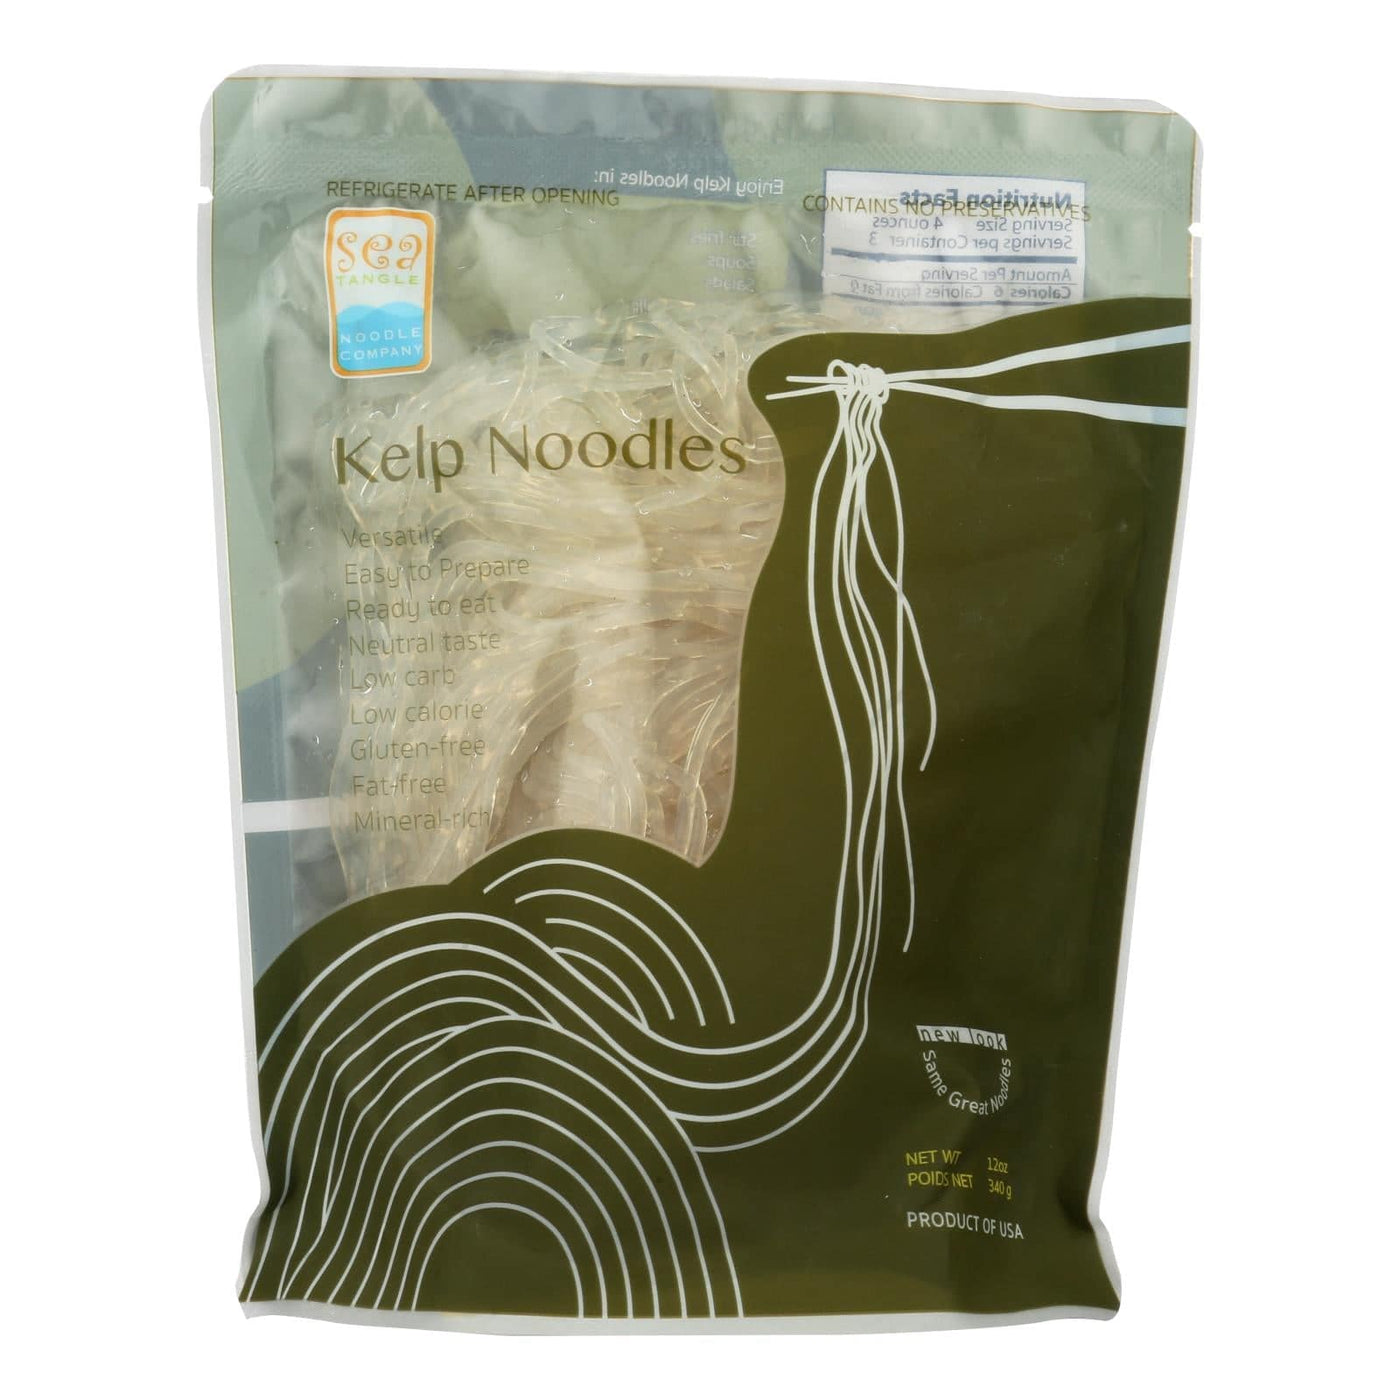 Buy Sea Tangle Noodle Company Kelp Noodles  - Case Of 12 - 12 Oz  at OnlyNaturals.us